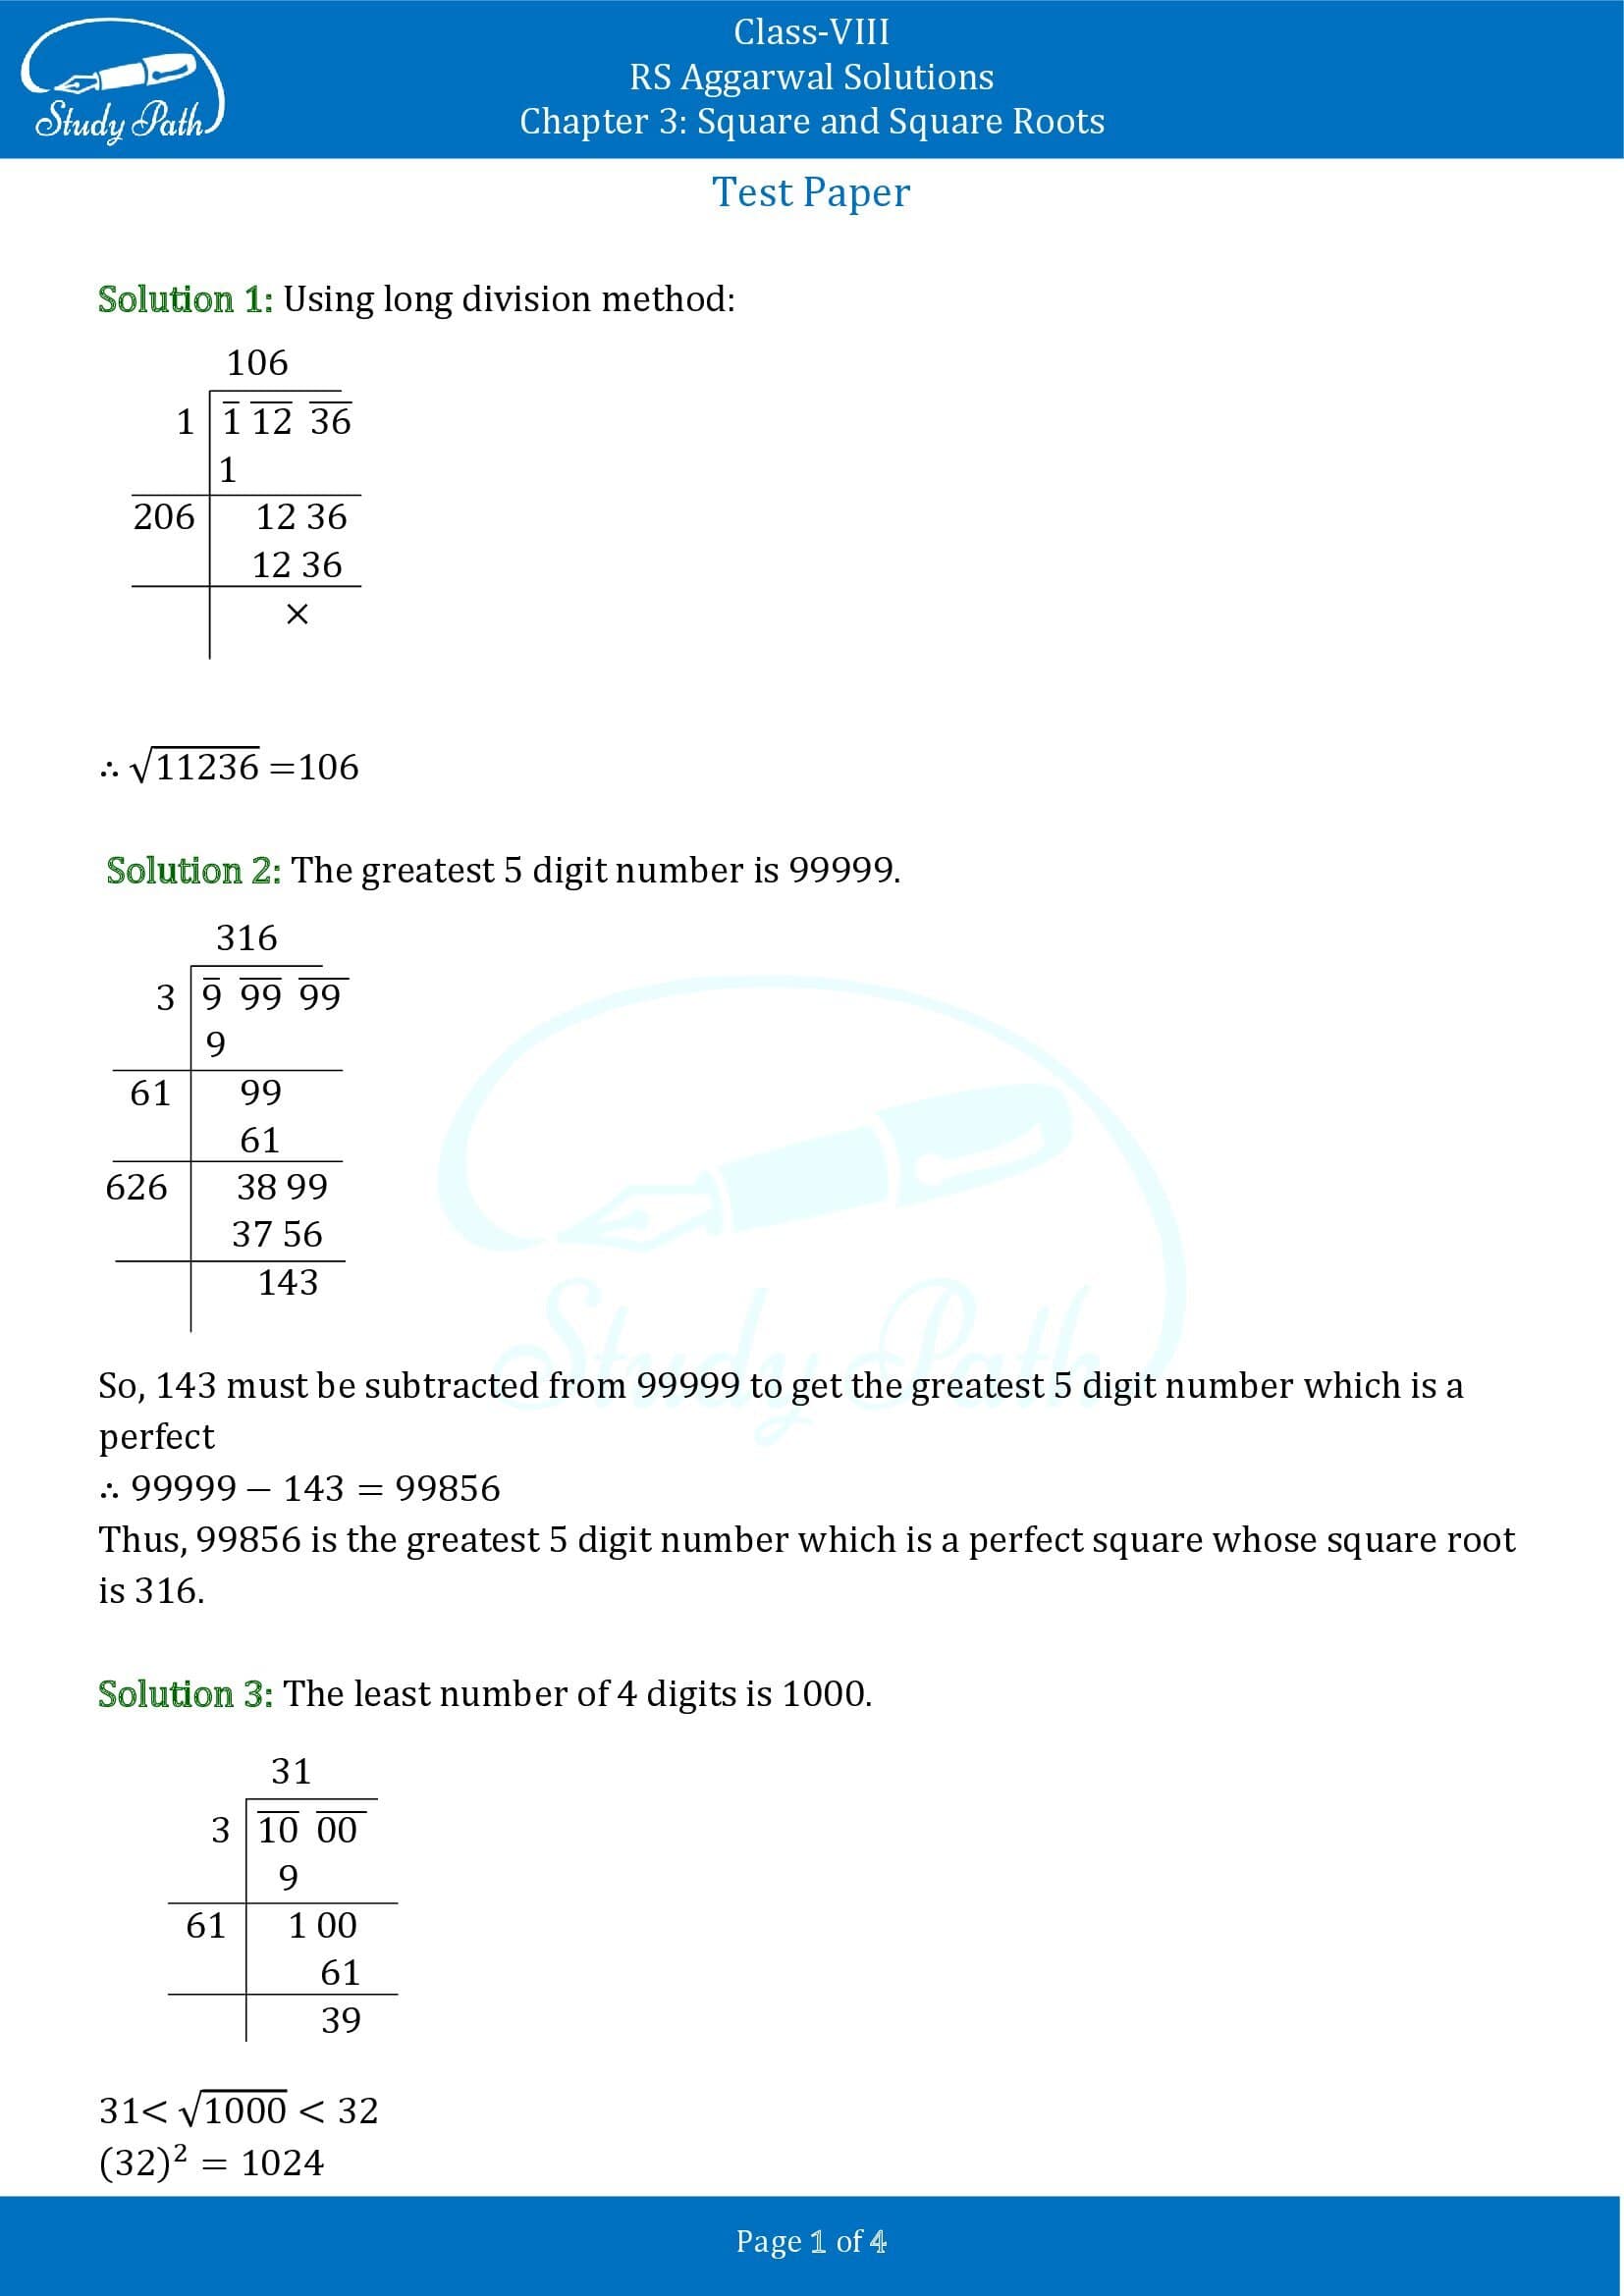 RS Aggarwal Solutions Class 8 Chapter 3 Square and Square Roots Test Paper 00001